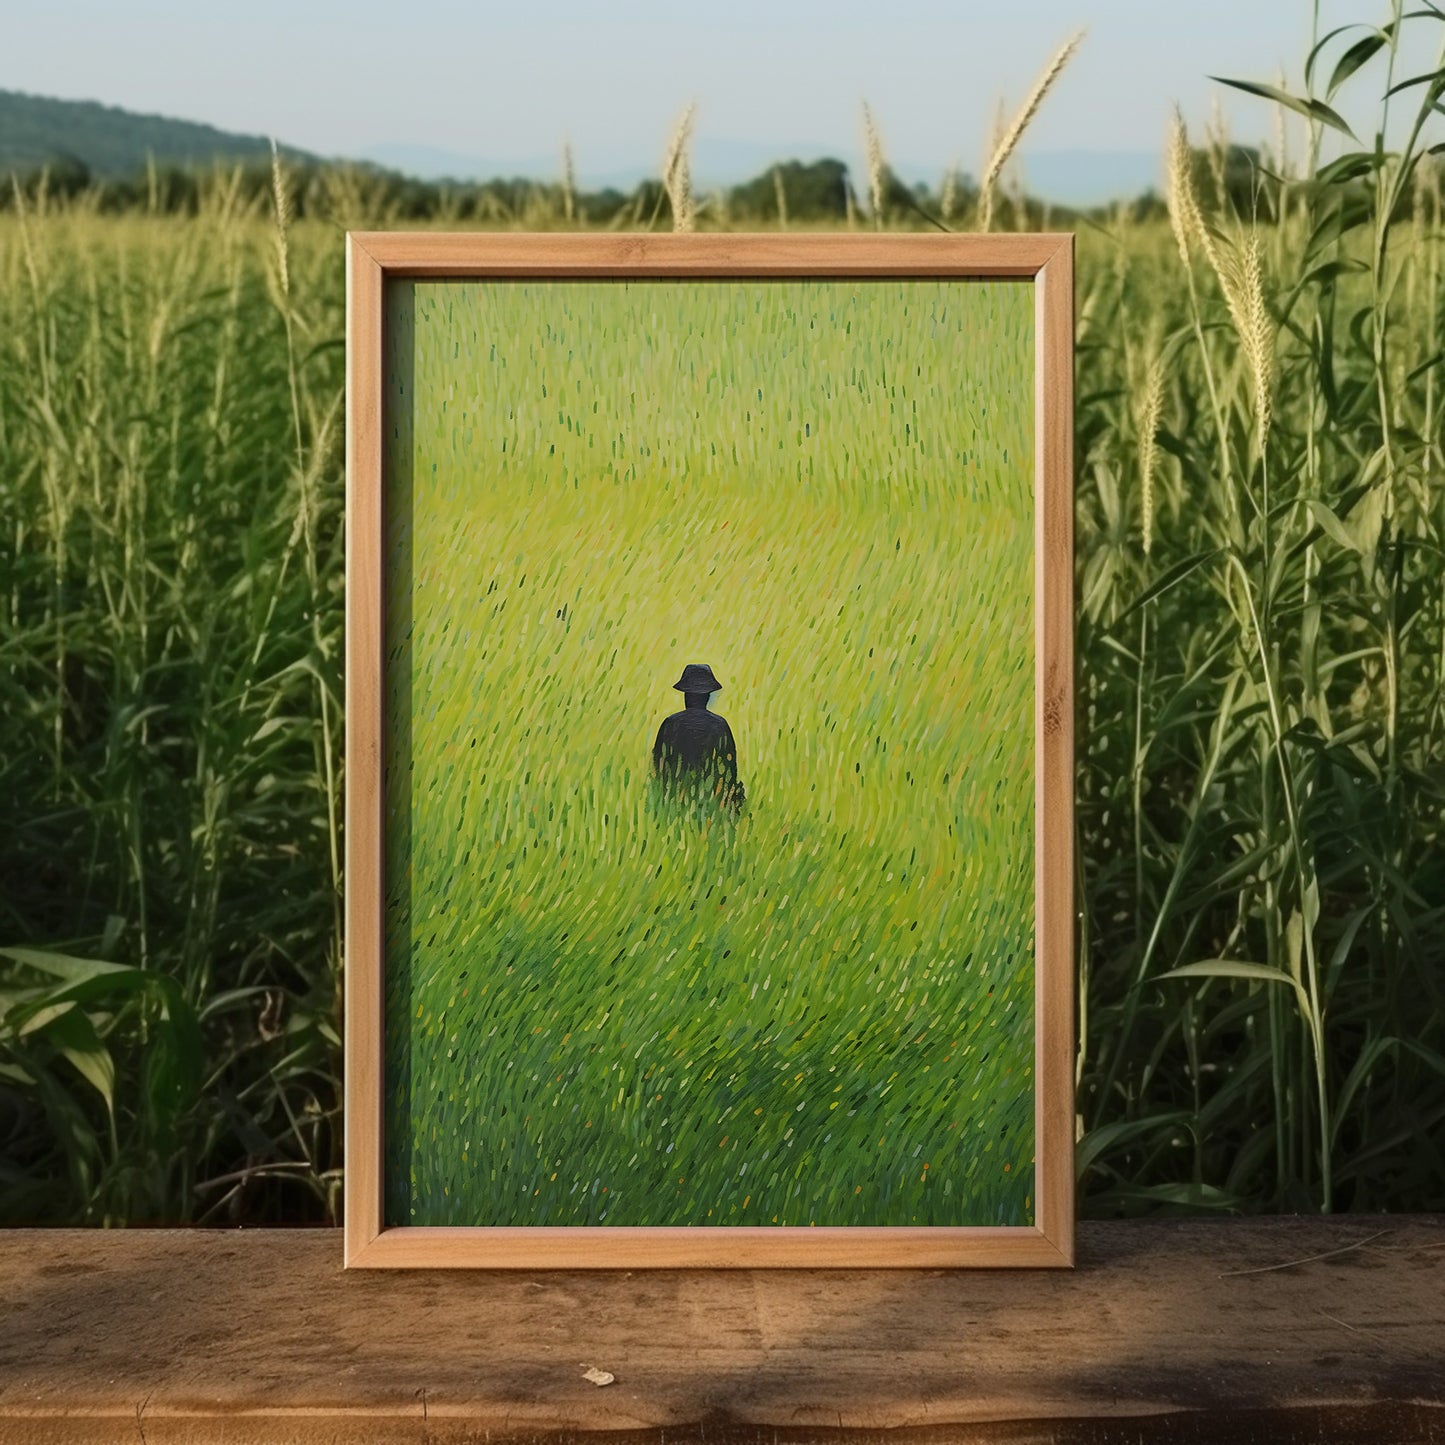 A framed painting of a figure in a field placed on a wooden surface outdoors.